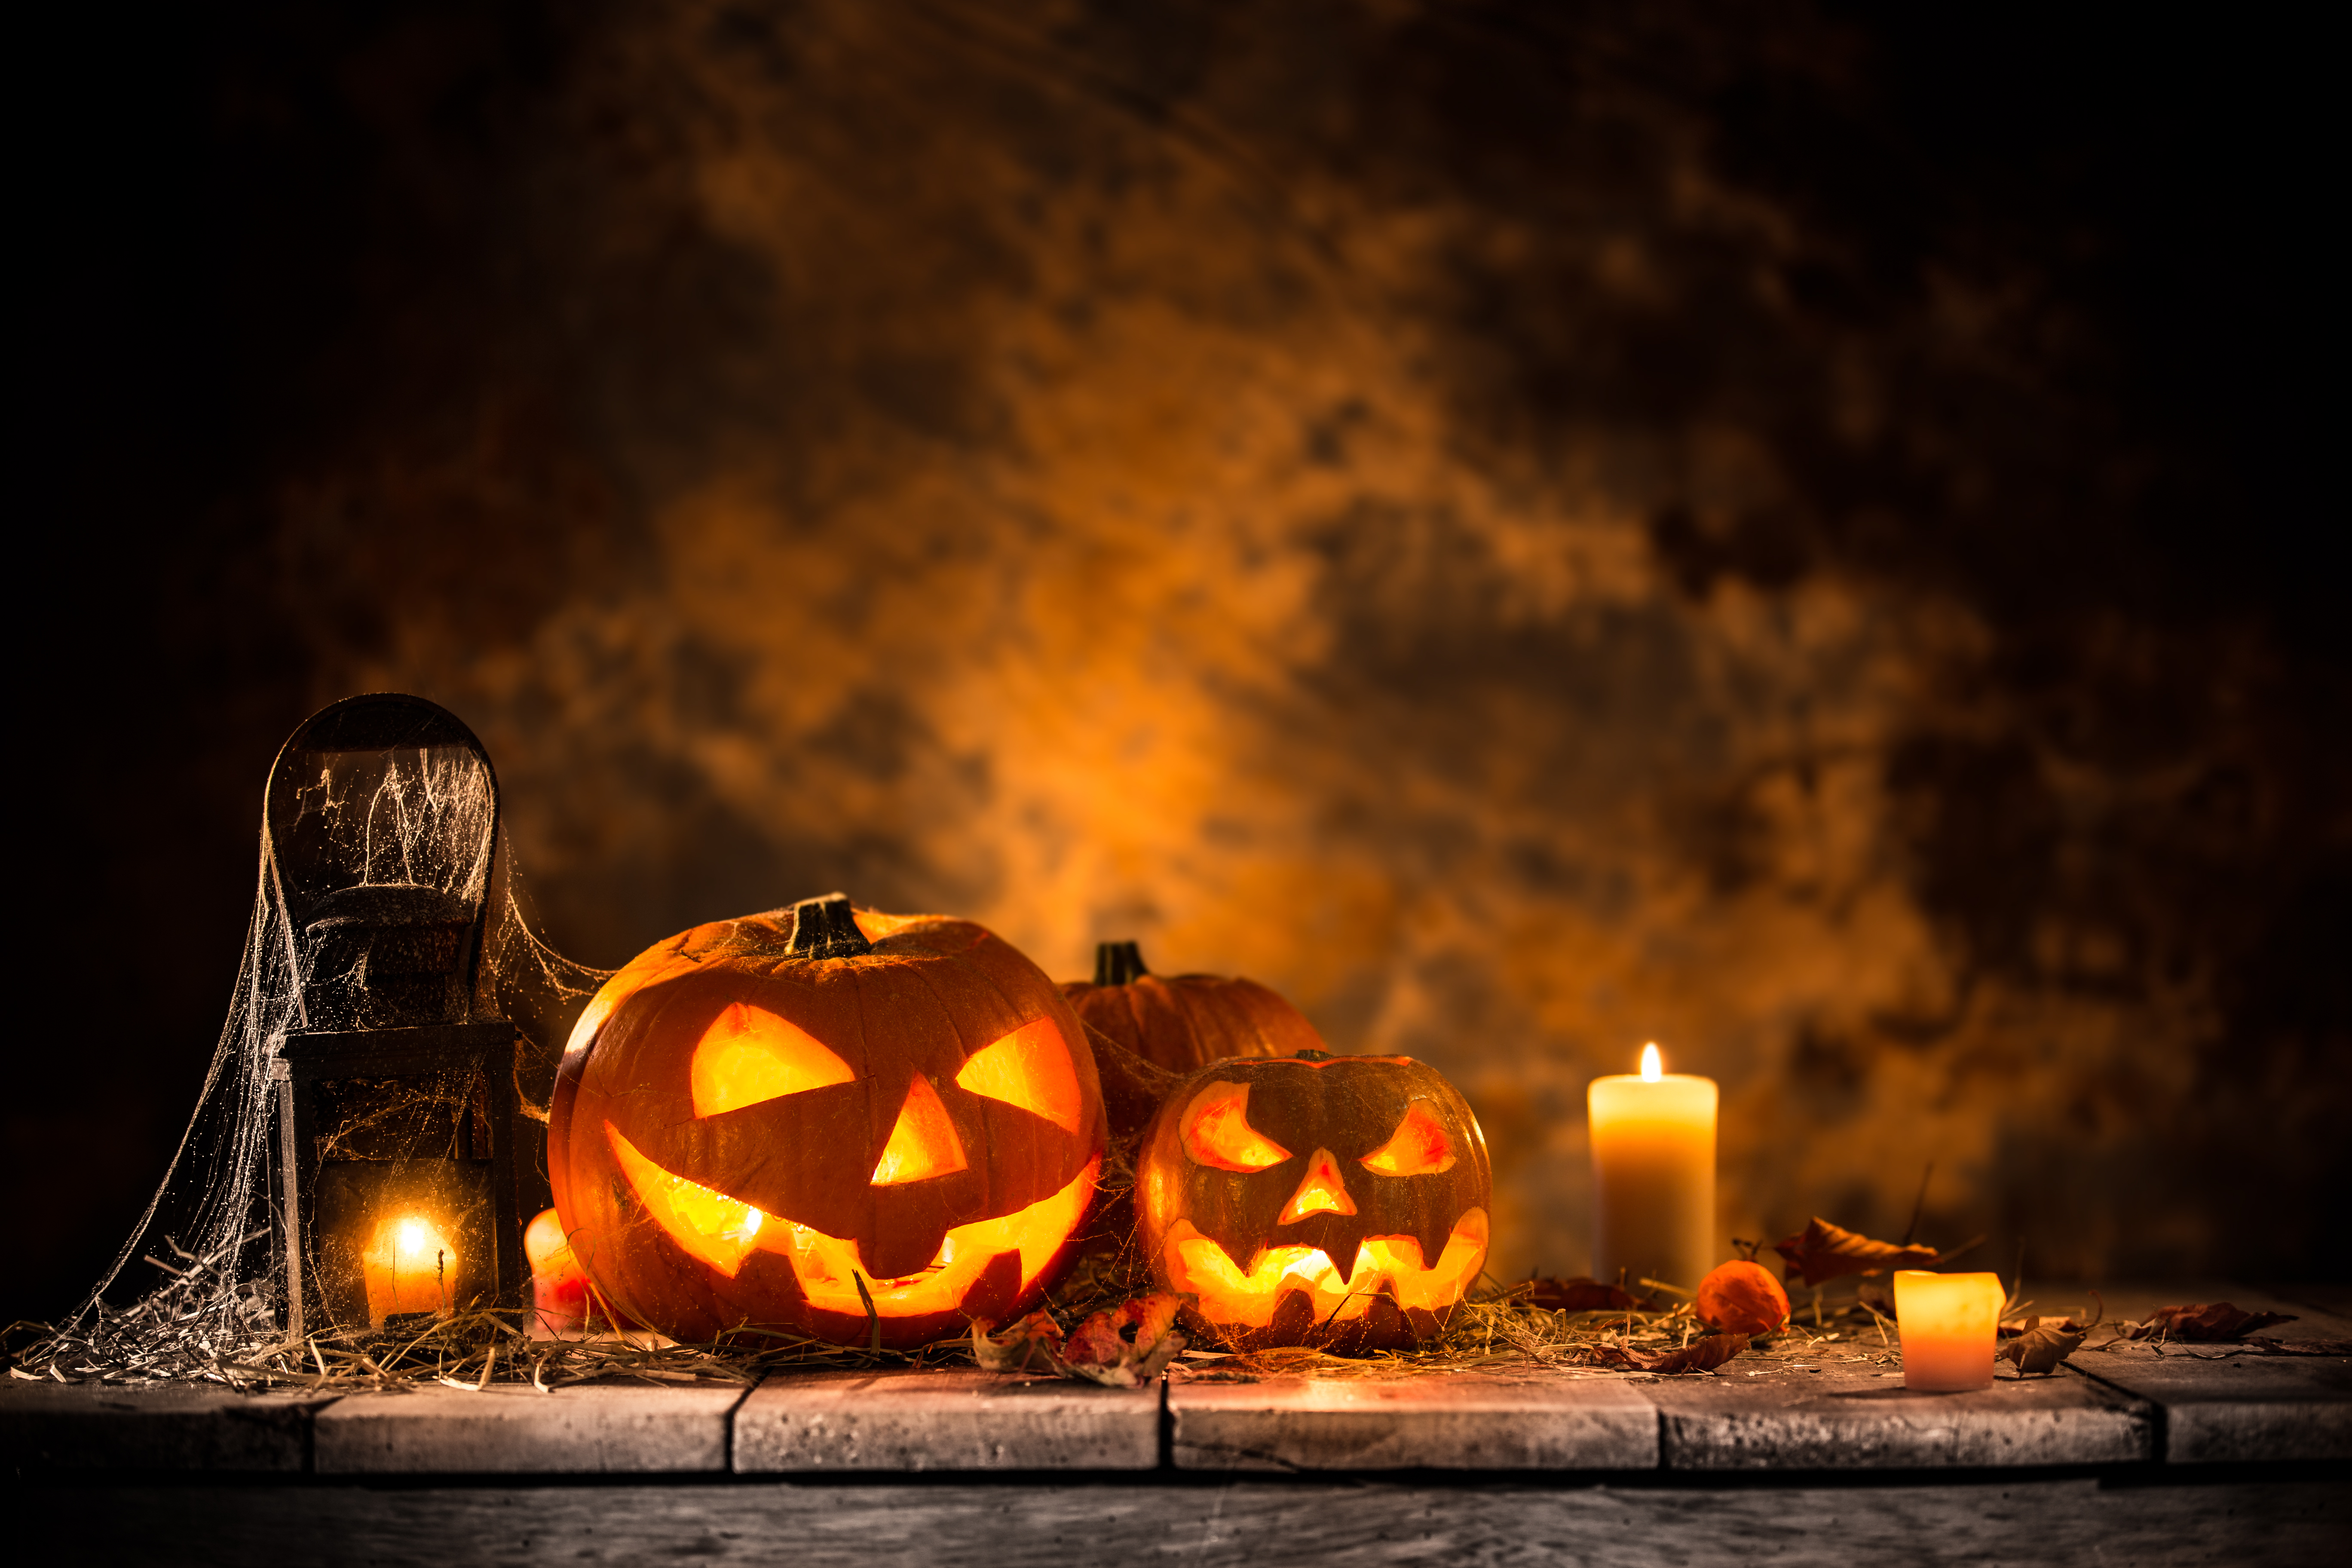 How to Keep Lil Trick-or-Treaters Safe on Halloween Night